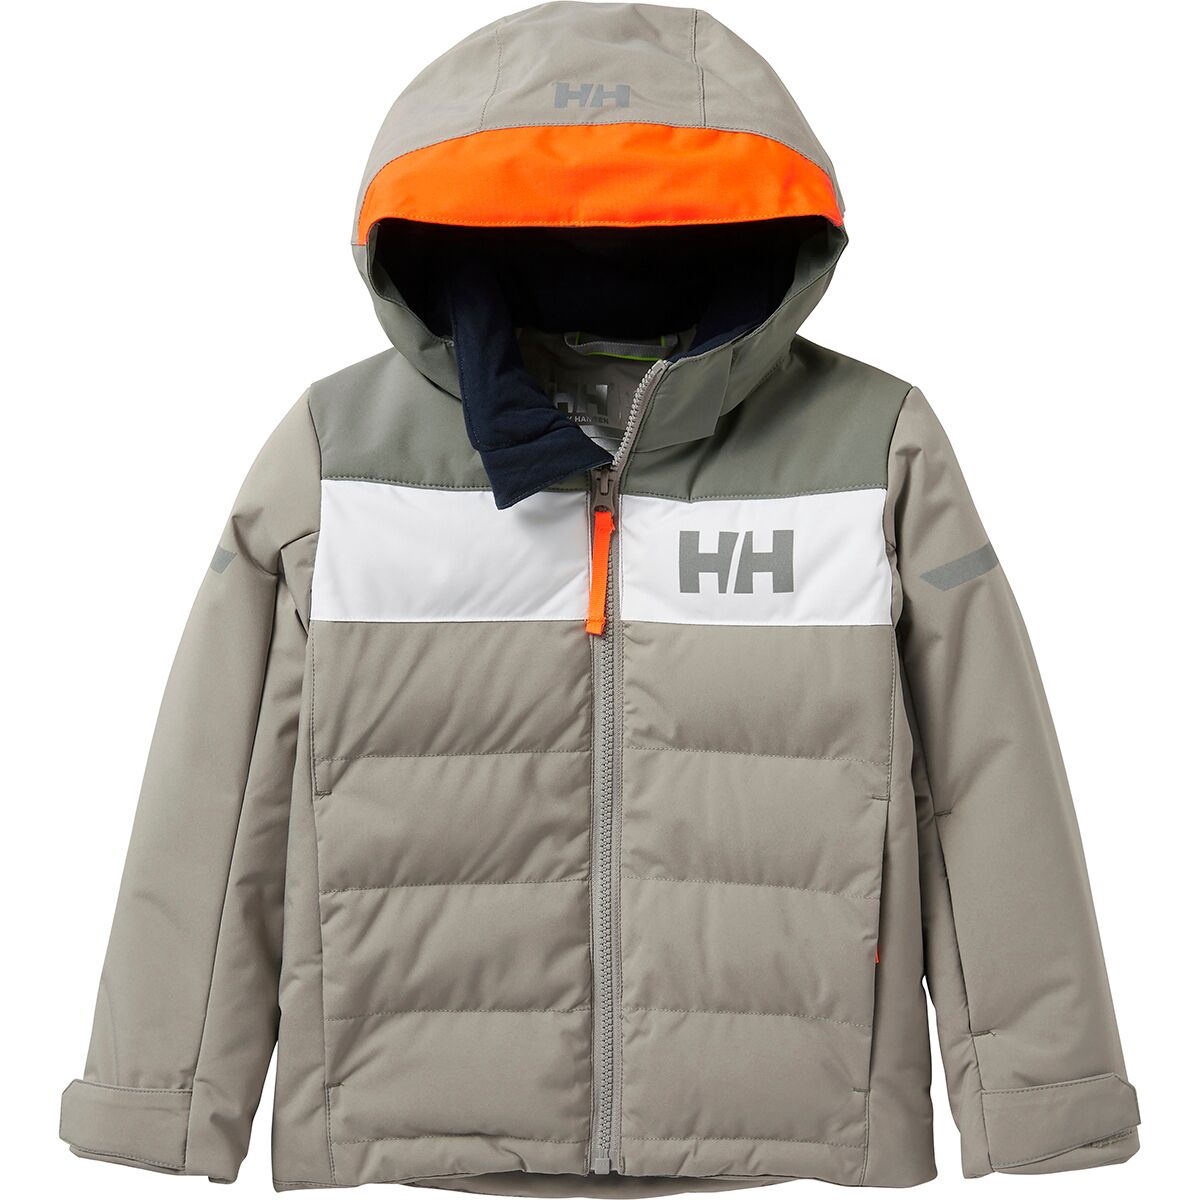 Helly Hansen Vertical Insulated Jacket - Toddlers'